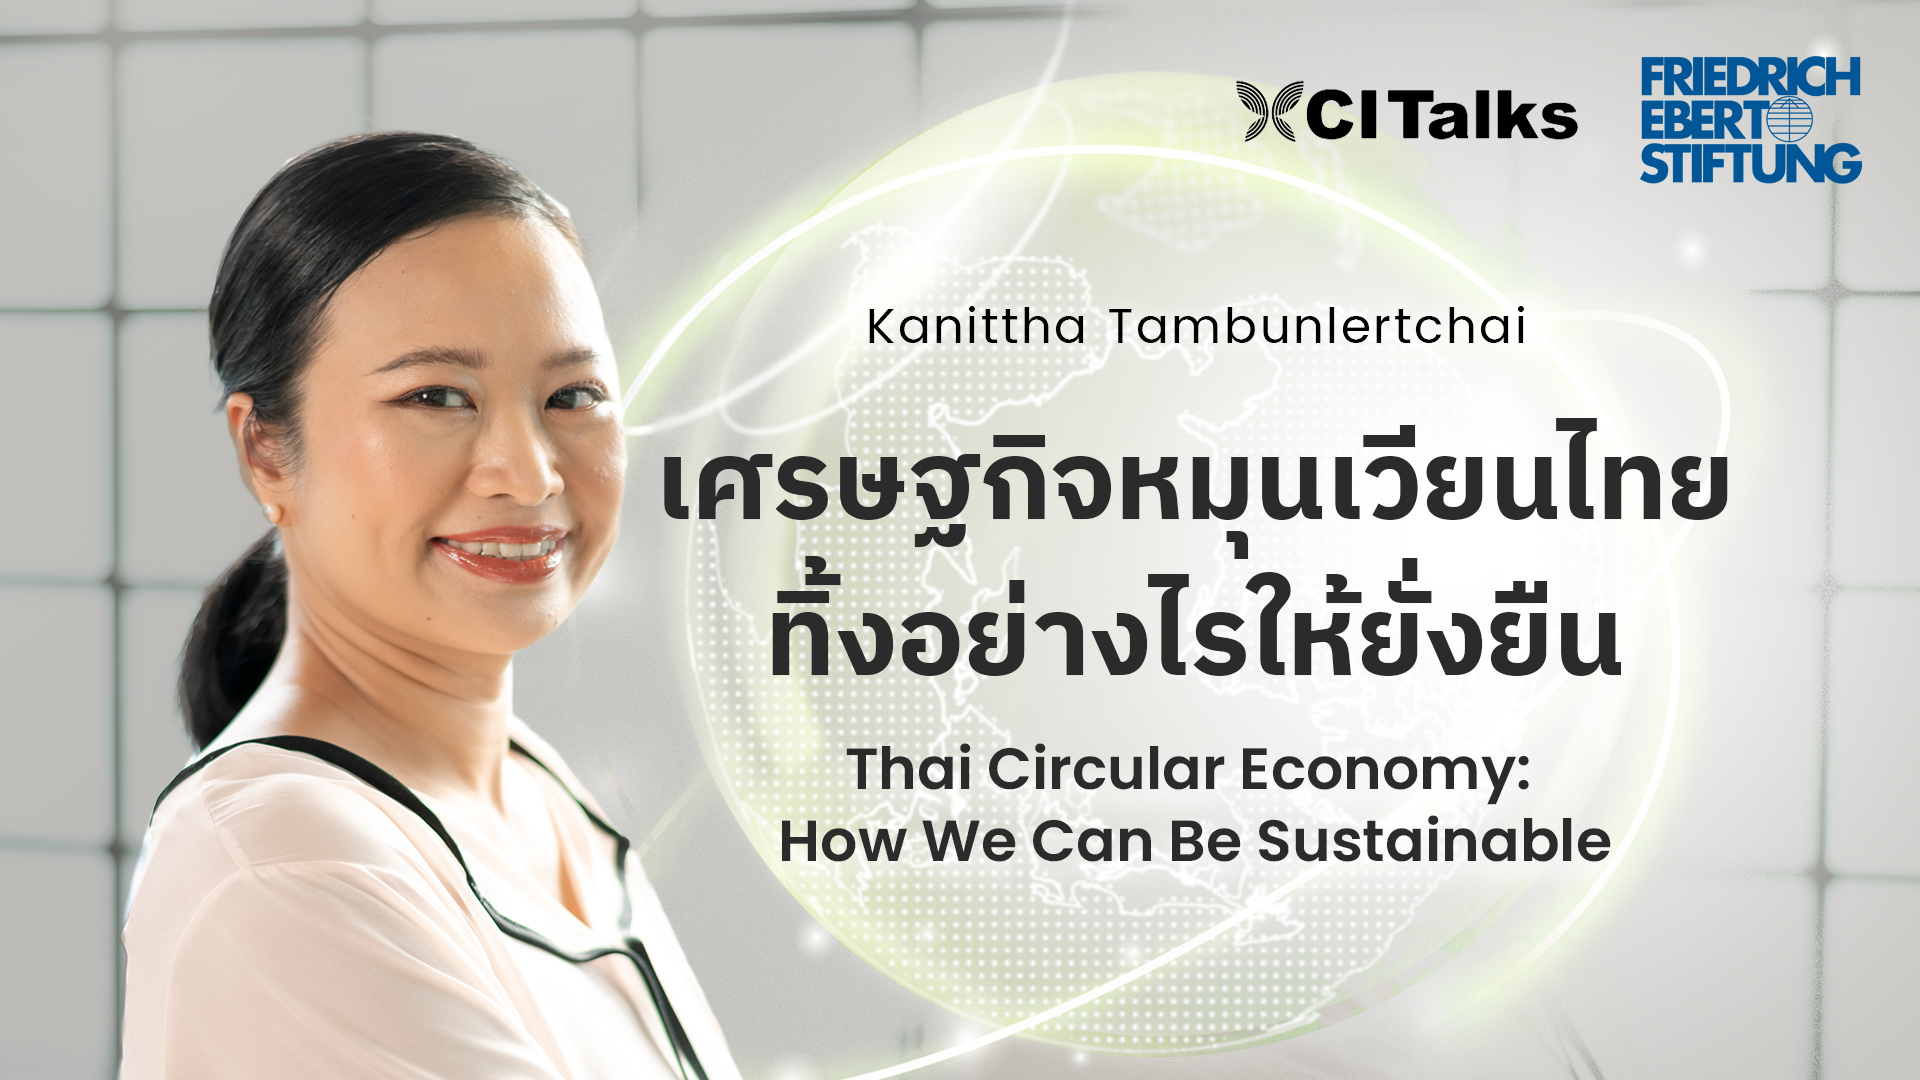 Thai Circular Economy for a sustainable future